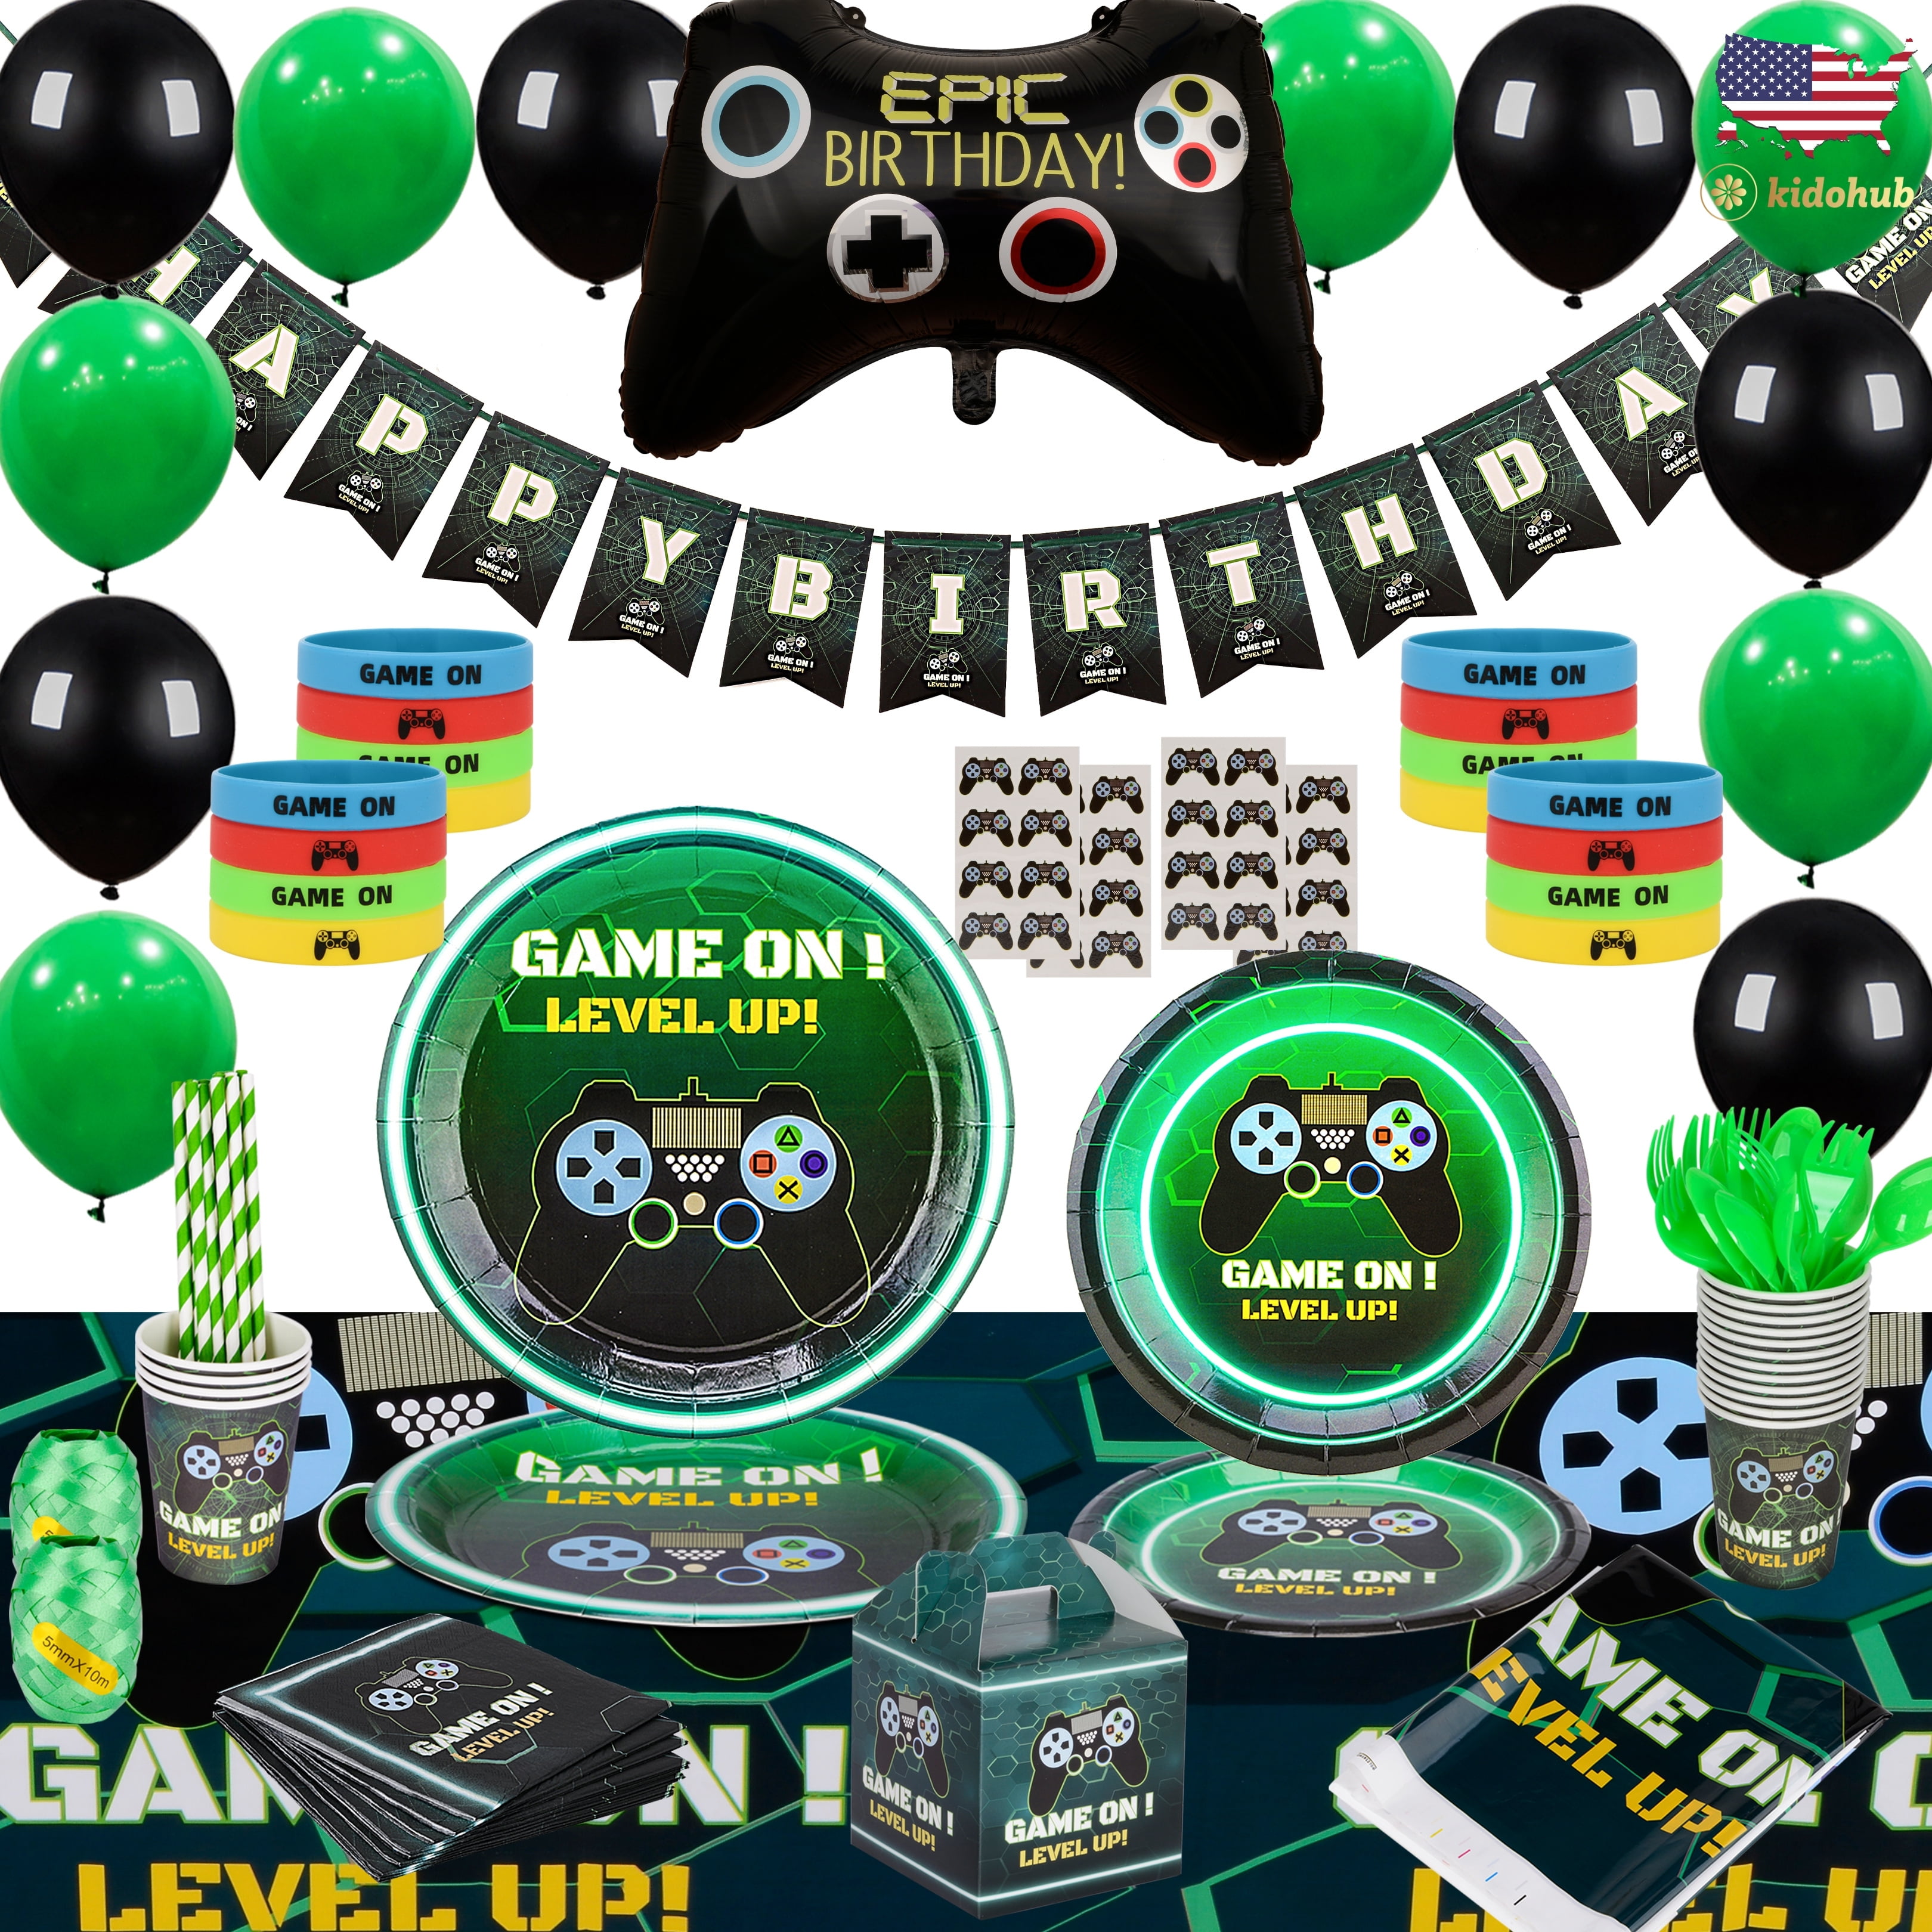 Gaming Theme Party Decorations Set include Latex Balloons Roblox Game Theme Birthday Party Supplies Happy Birthday Banner Cake Topper for Video Game Fans Birthday Party Decorations